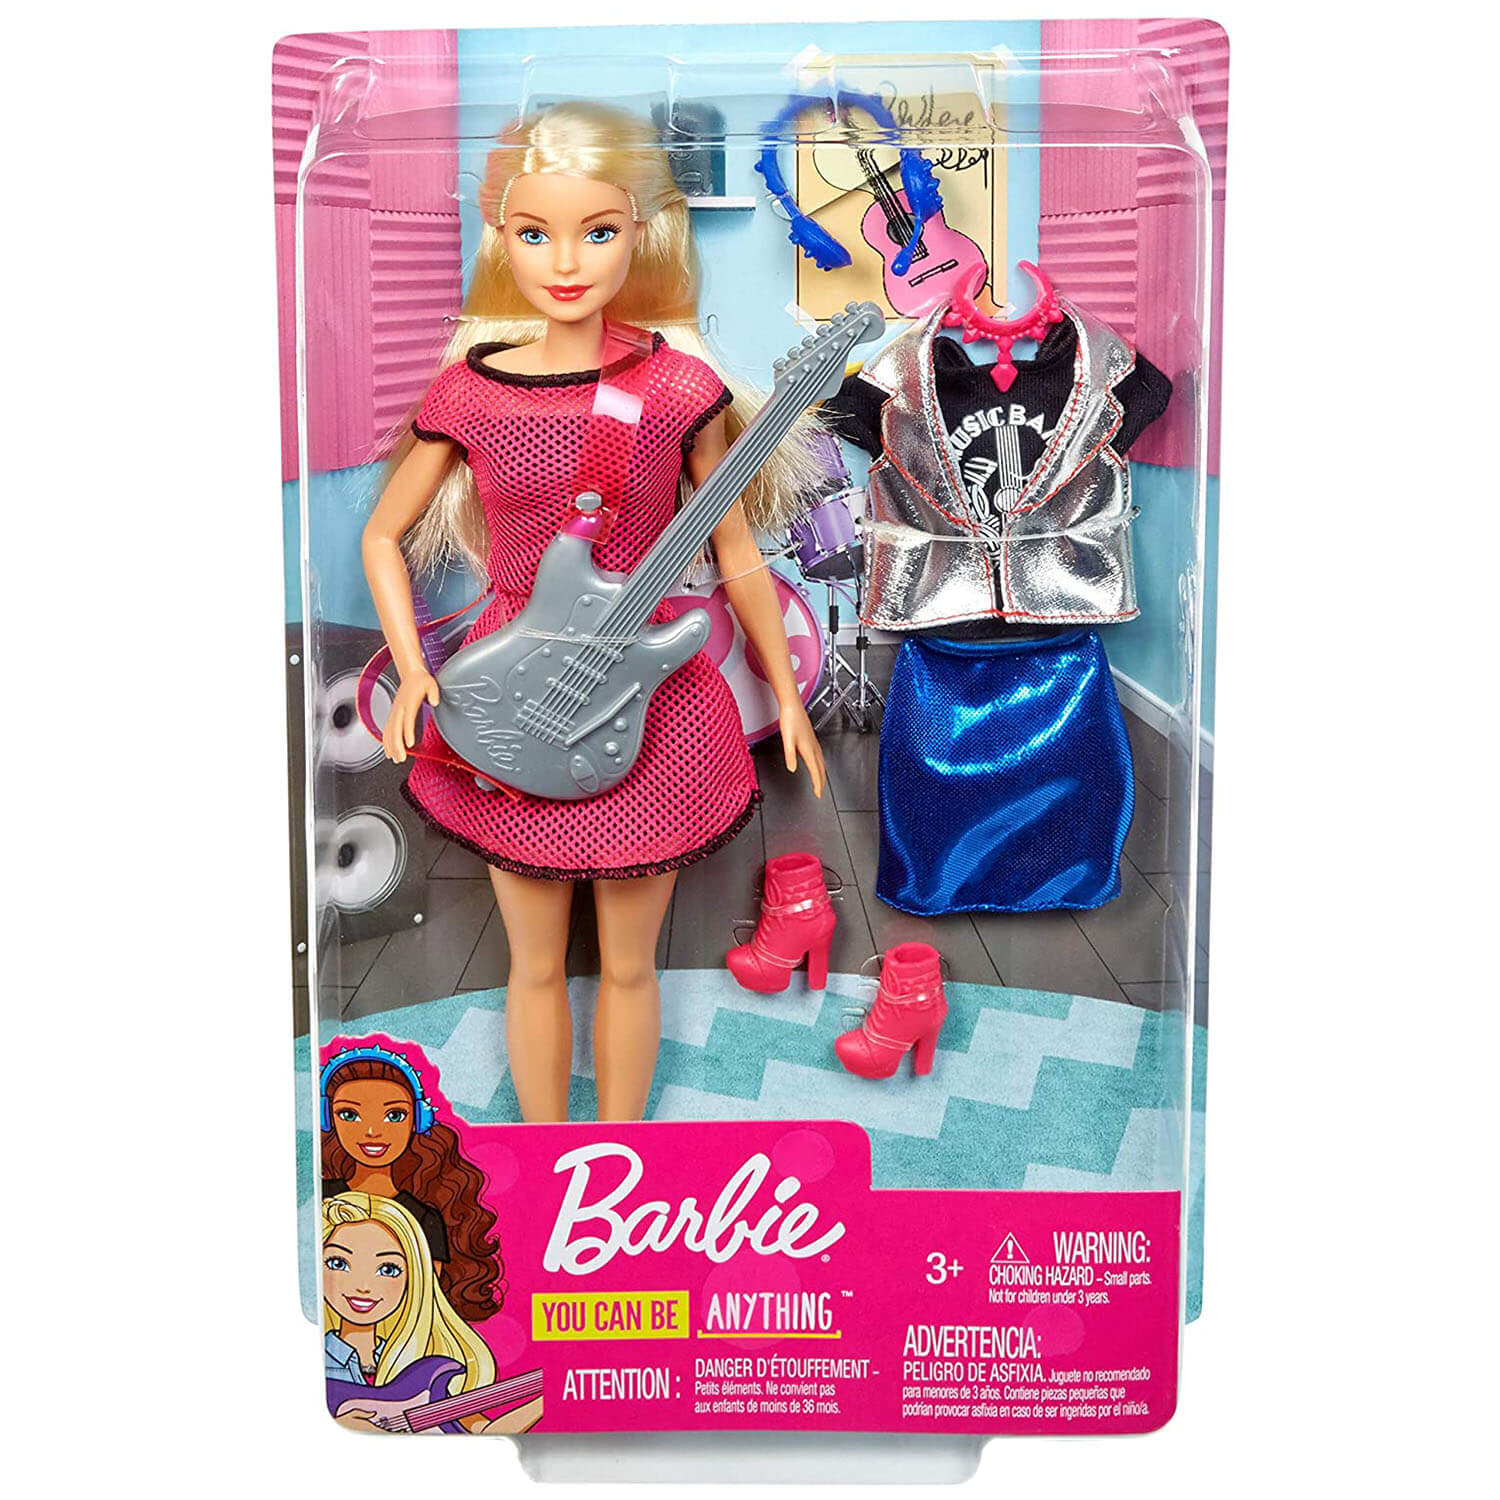 Front view of the Barbie Musician Career Doll package.